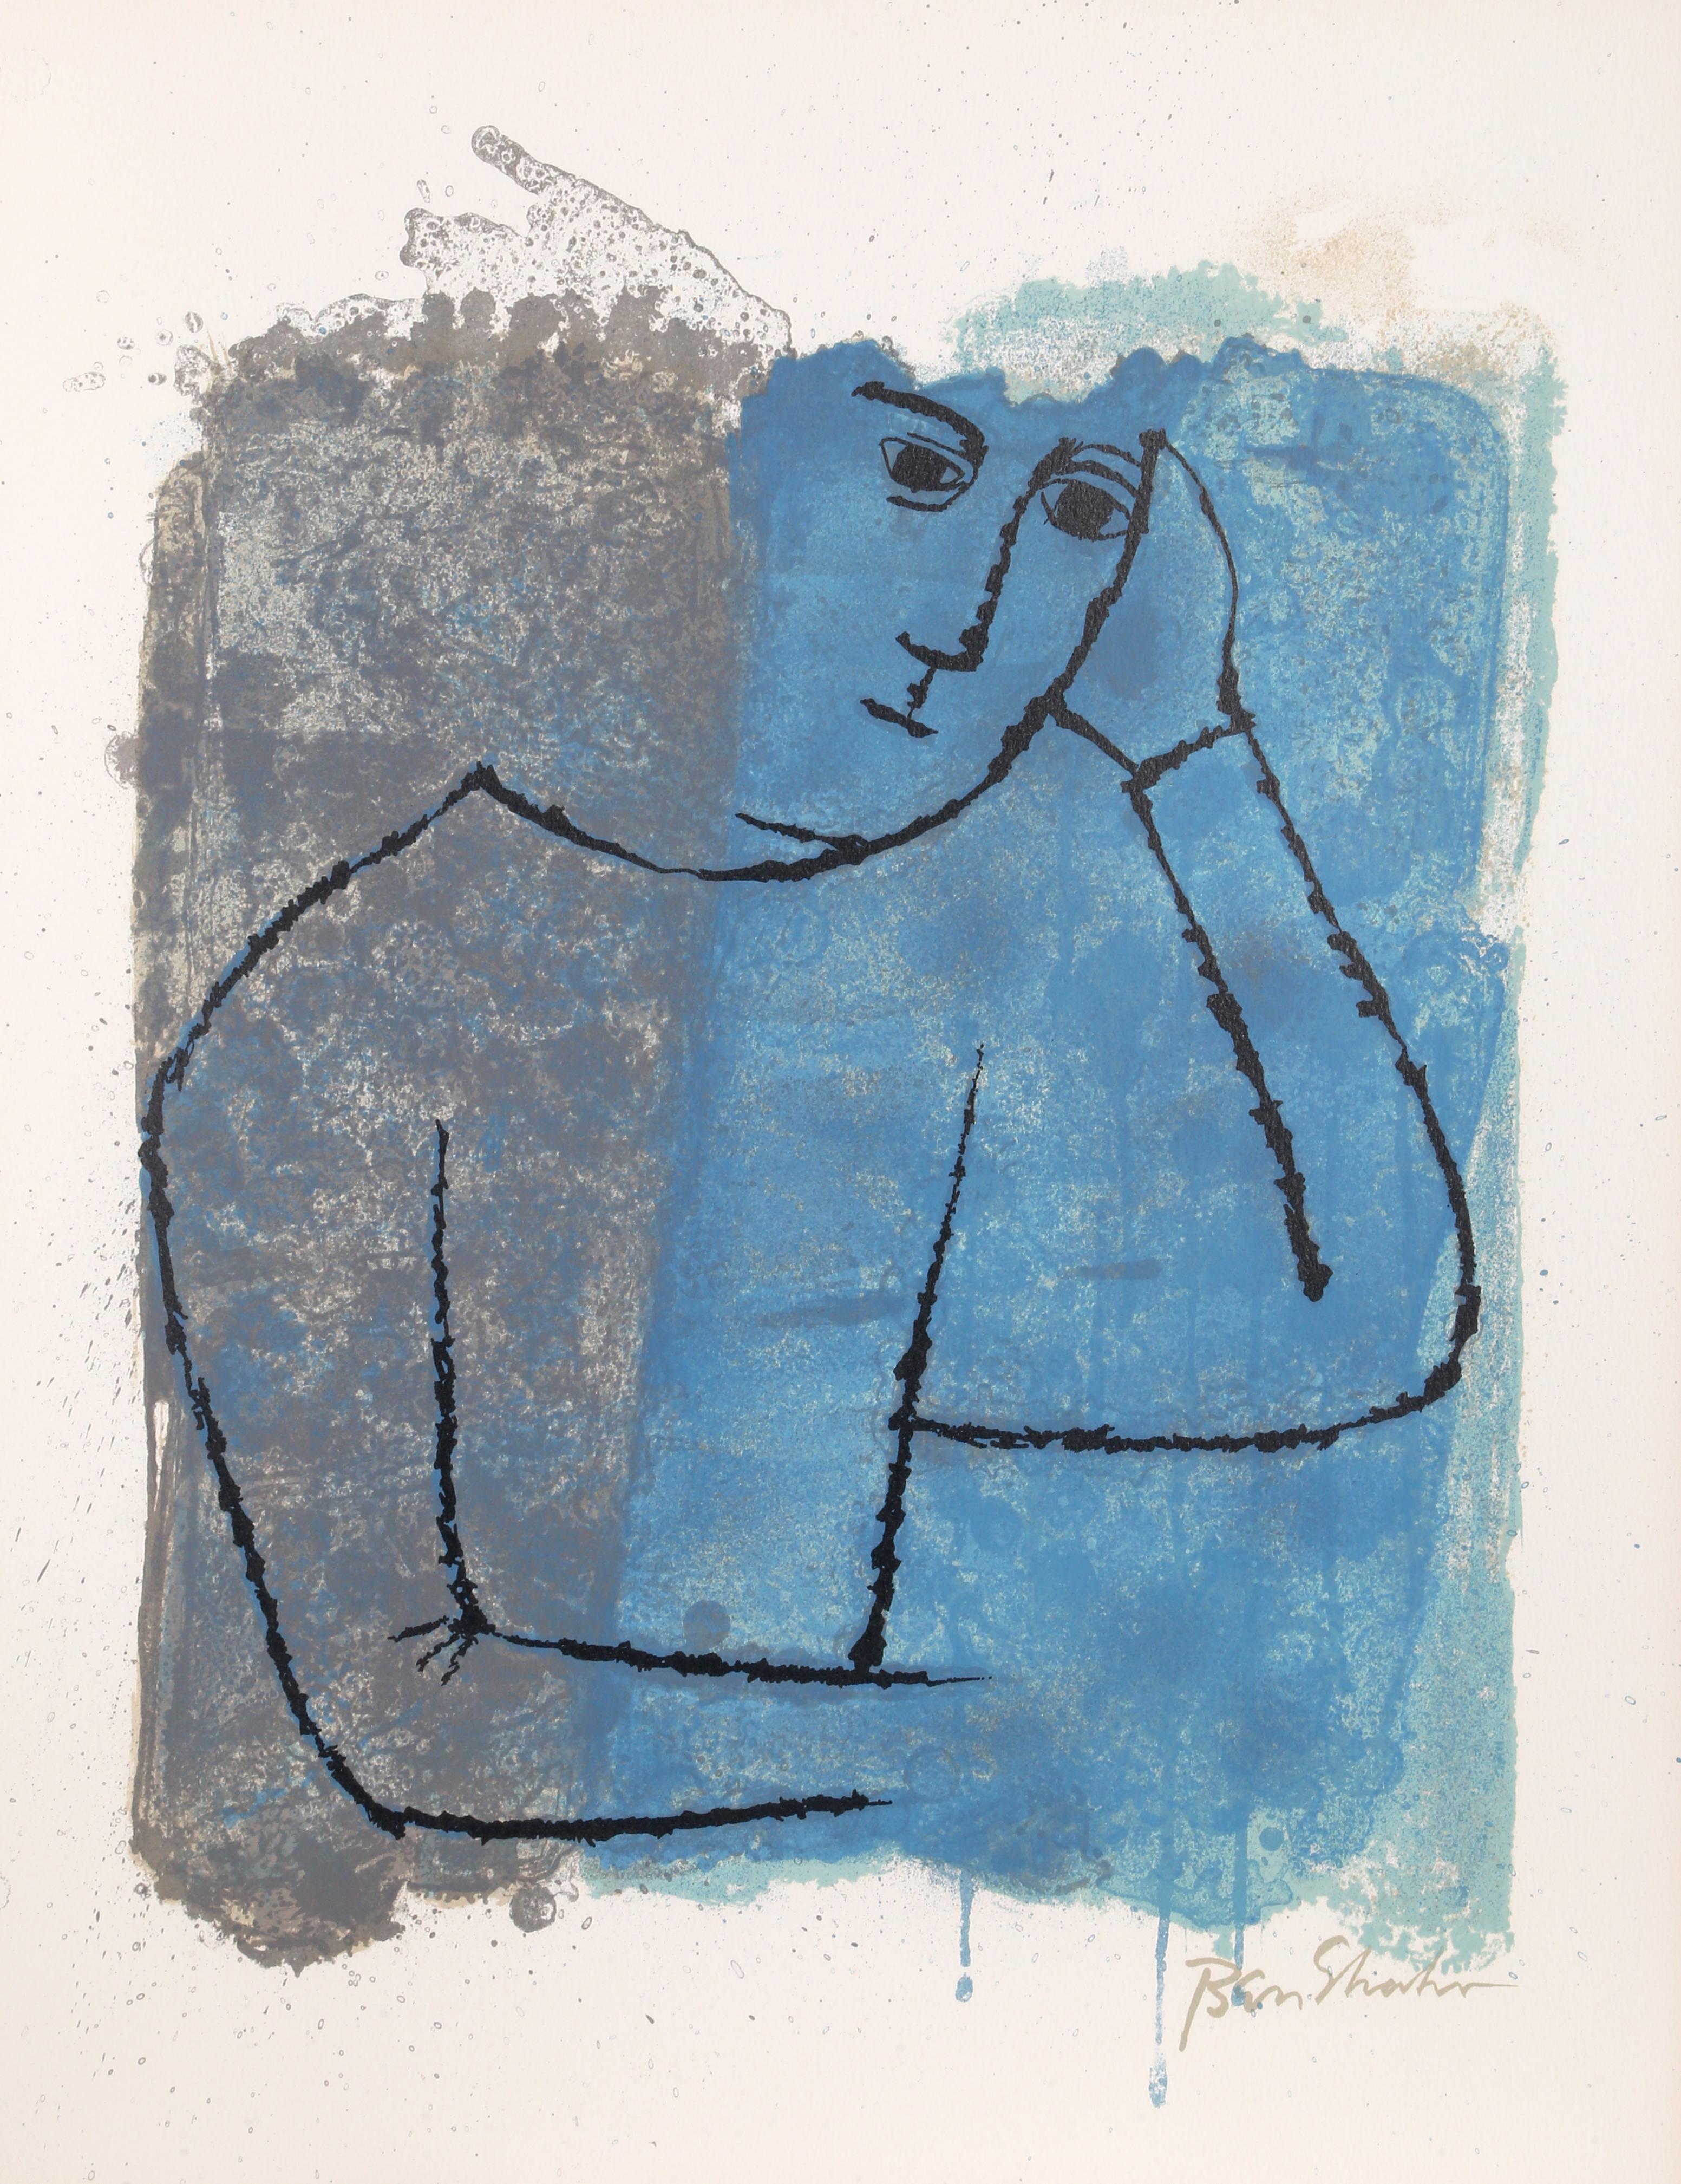 Artist: Ben Shahn, Lithuanian/American (1898 - 1969)
Title: In Rooms Withdrawn and Quiet from the Rilke Portfolio
Year: 1968
Medium: Lithograph on Richard de Bas, printed signature (as issued)
Edition Size: 750
Size: 22.5 x 17.75 in. (57.15 x 45.09